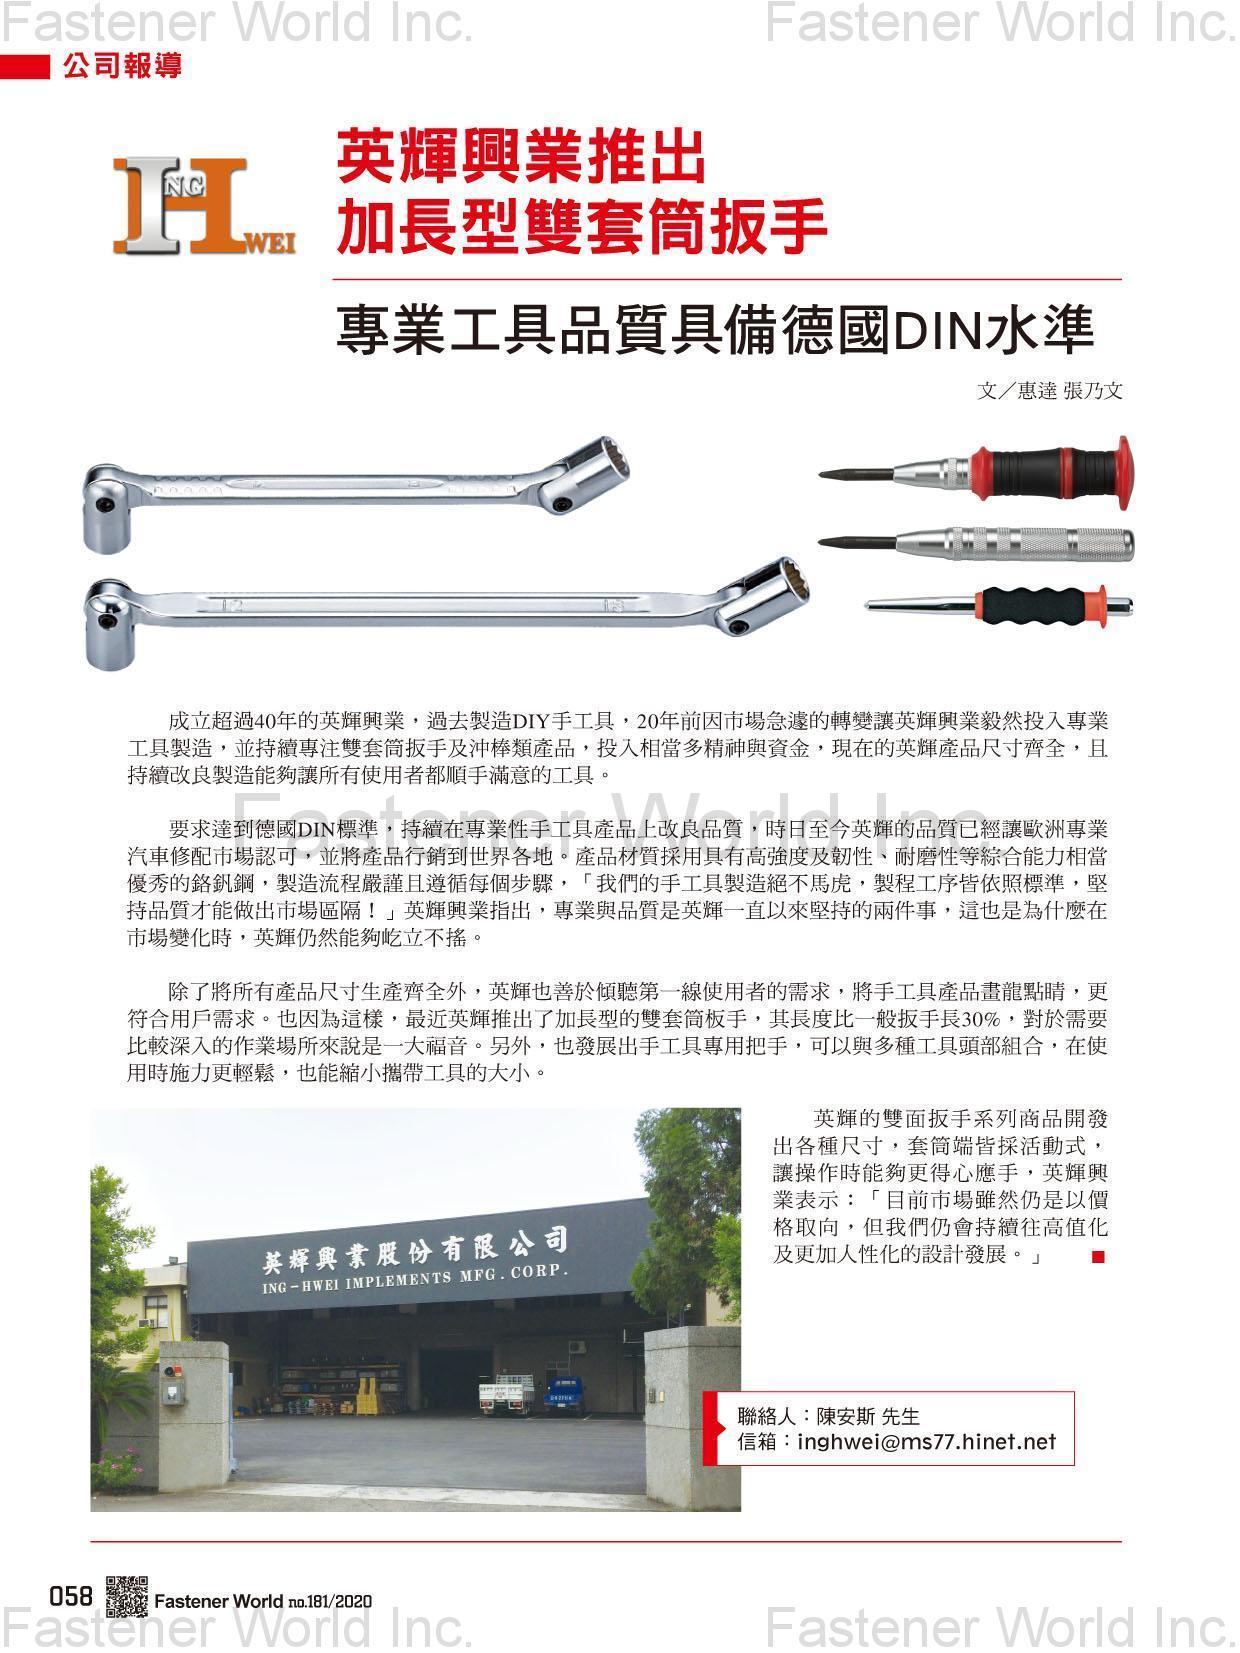 ING-HWEI IMPLEMENTS MFG. CORP. , SOCKET WRENCH_HEAVY DUTYOFFSET RING WRENCH_ AUTO CENTER PUNCH_ PUNCH AND CHISEL_ FLARE NUT WRENCH_ BASIN WRENCH_ MULTI WRENCH_ SPARK PLUG TOOL_ TAICHUNG CITY, TAIWAN_ ING-HWEI IMPLEMENTS MFG. CORP. Country of origin-Taiwan , Socket Wrench Sets & Sockets